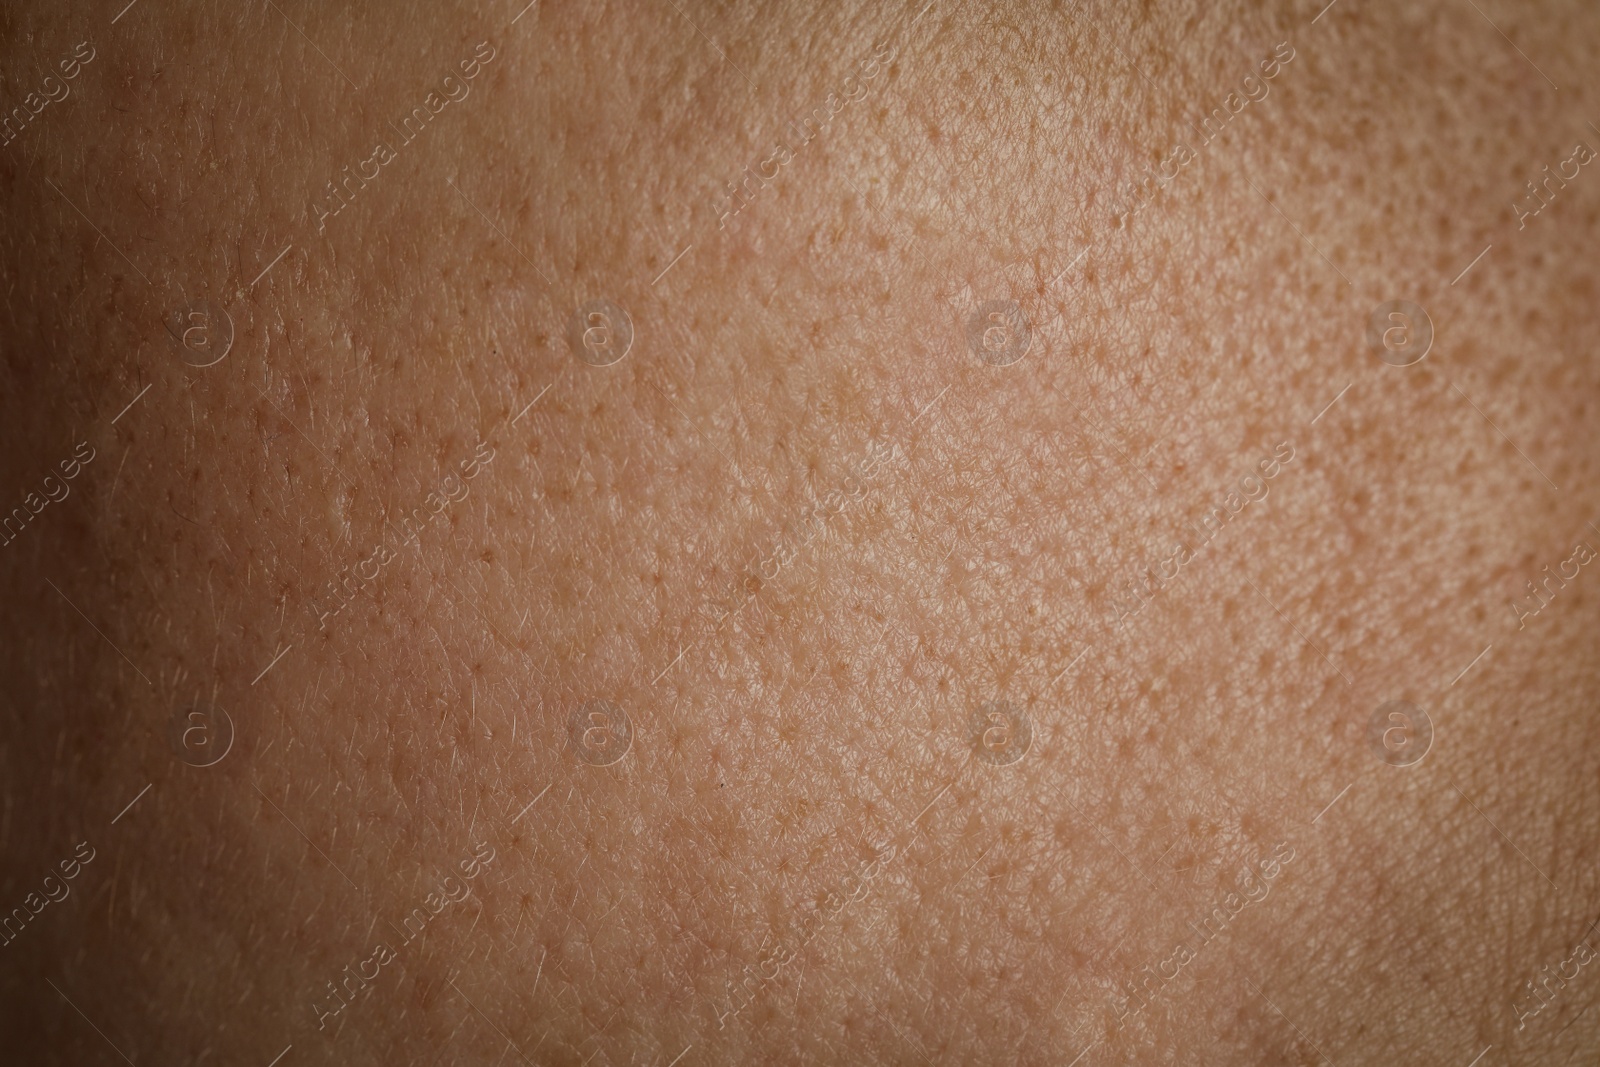 Photo of Texture of human skin as background, closeup view